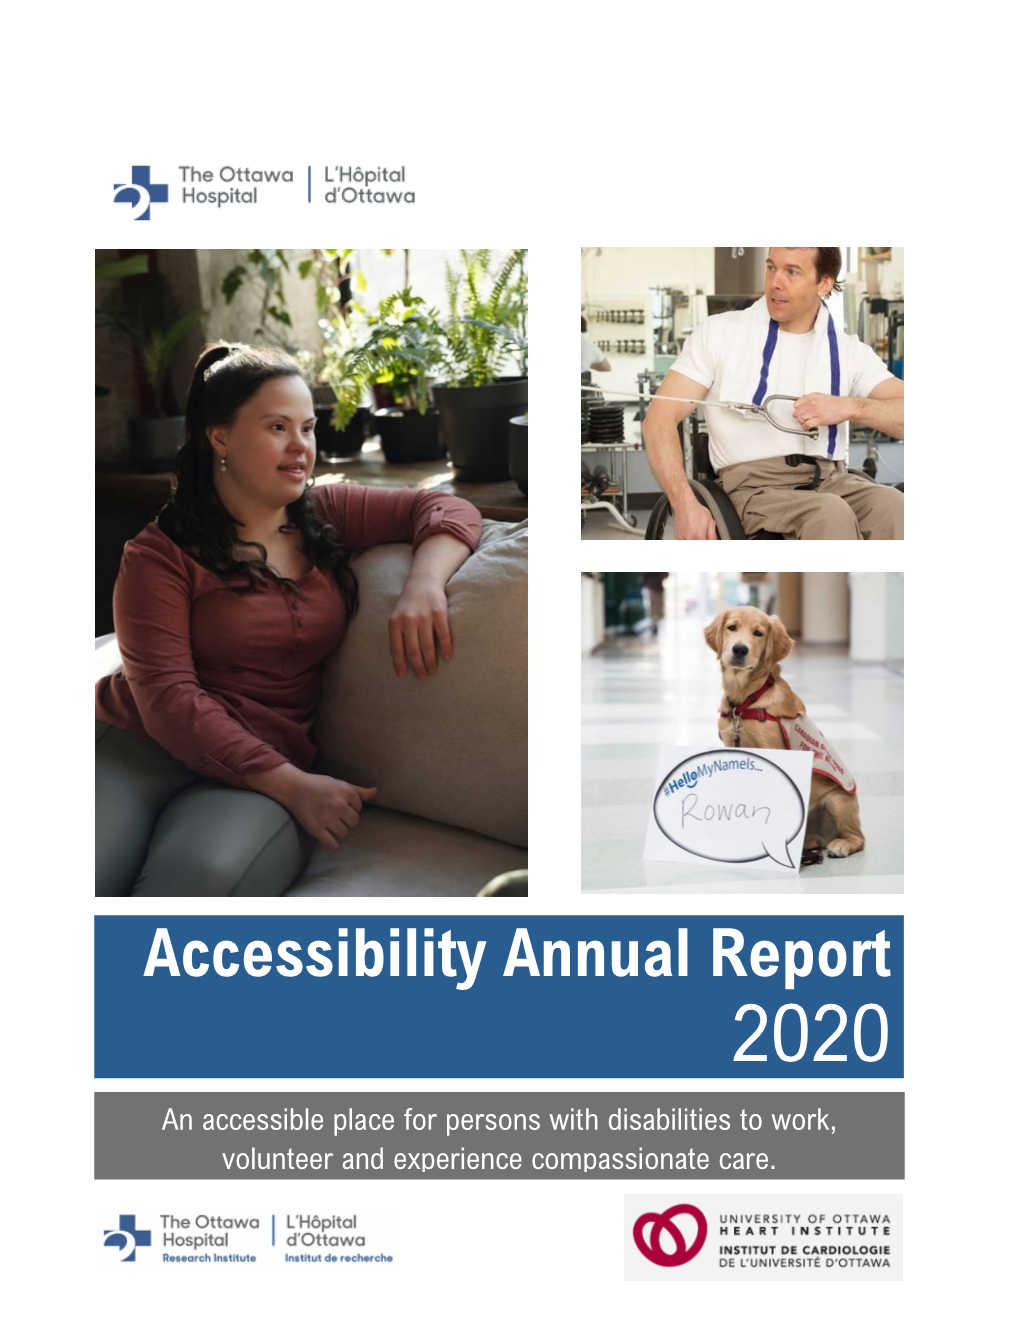 Annual Report on Accessibility 2020